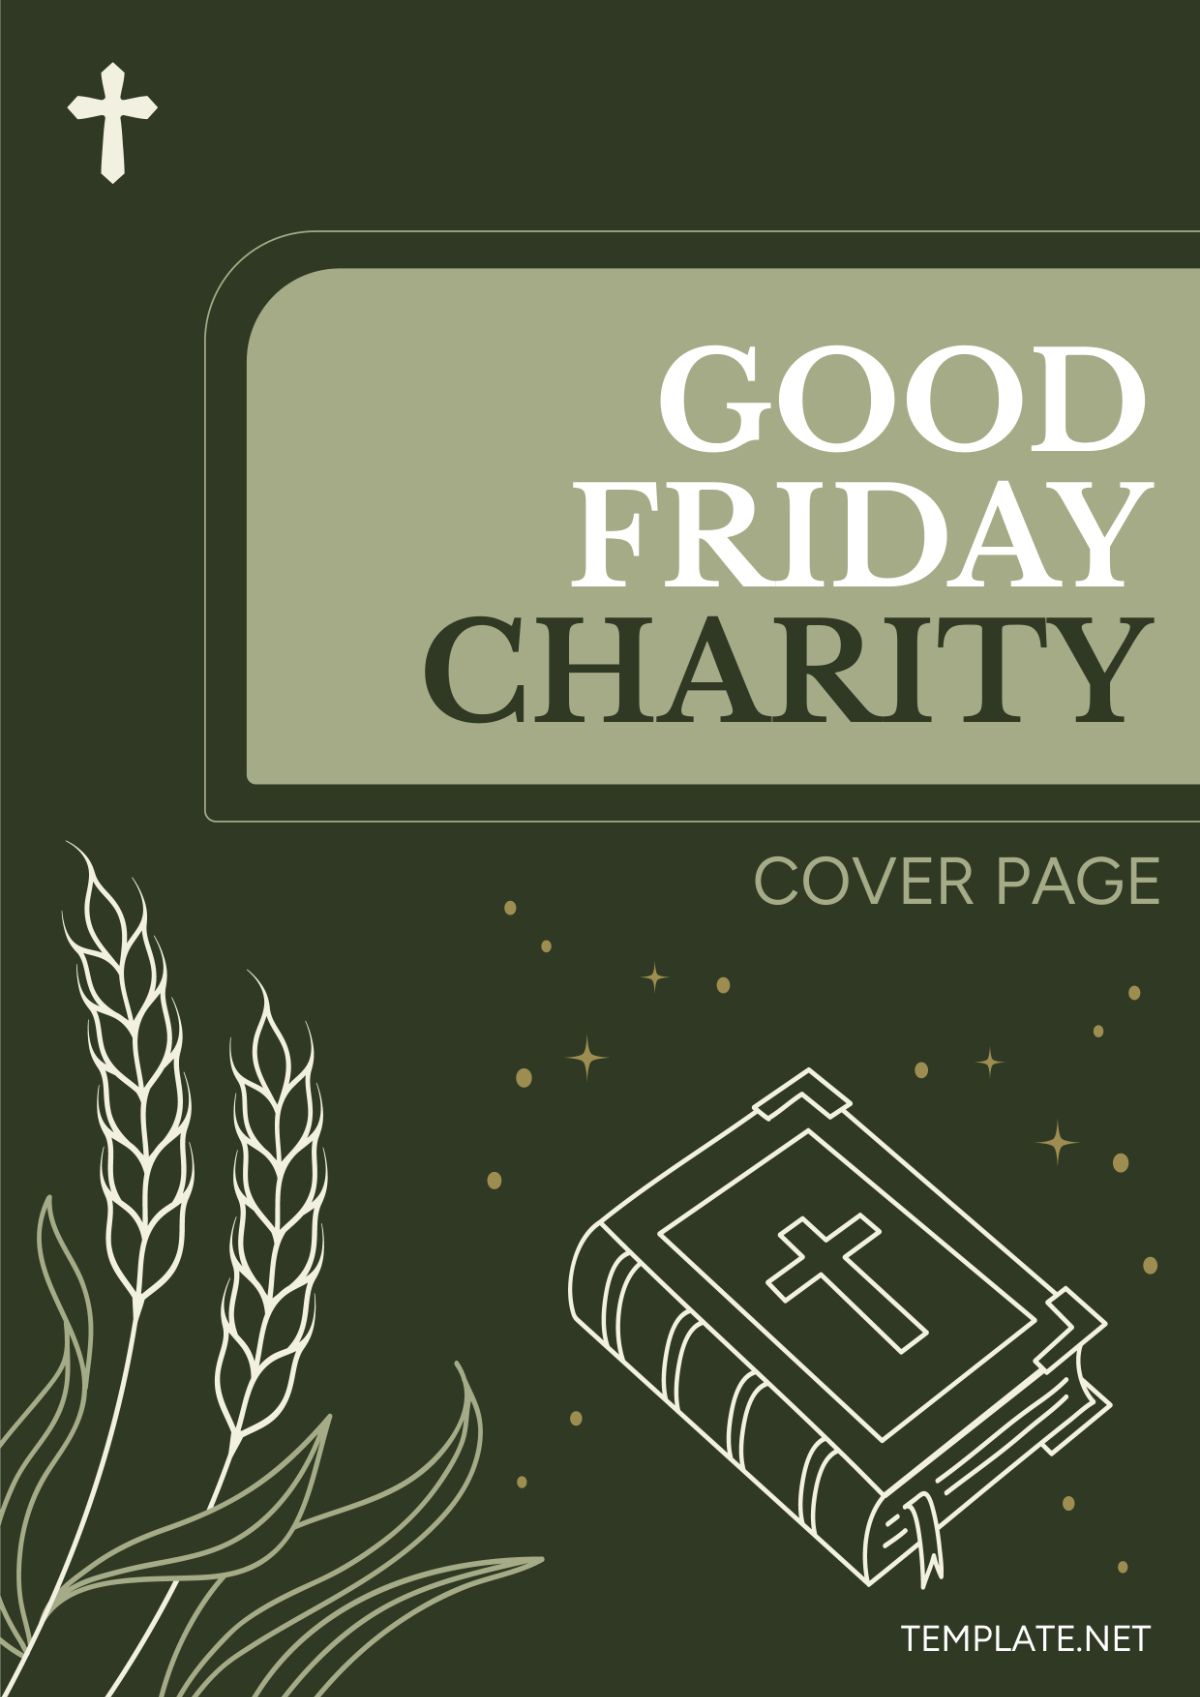 Good Friday Charity Cover Page